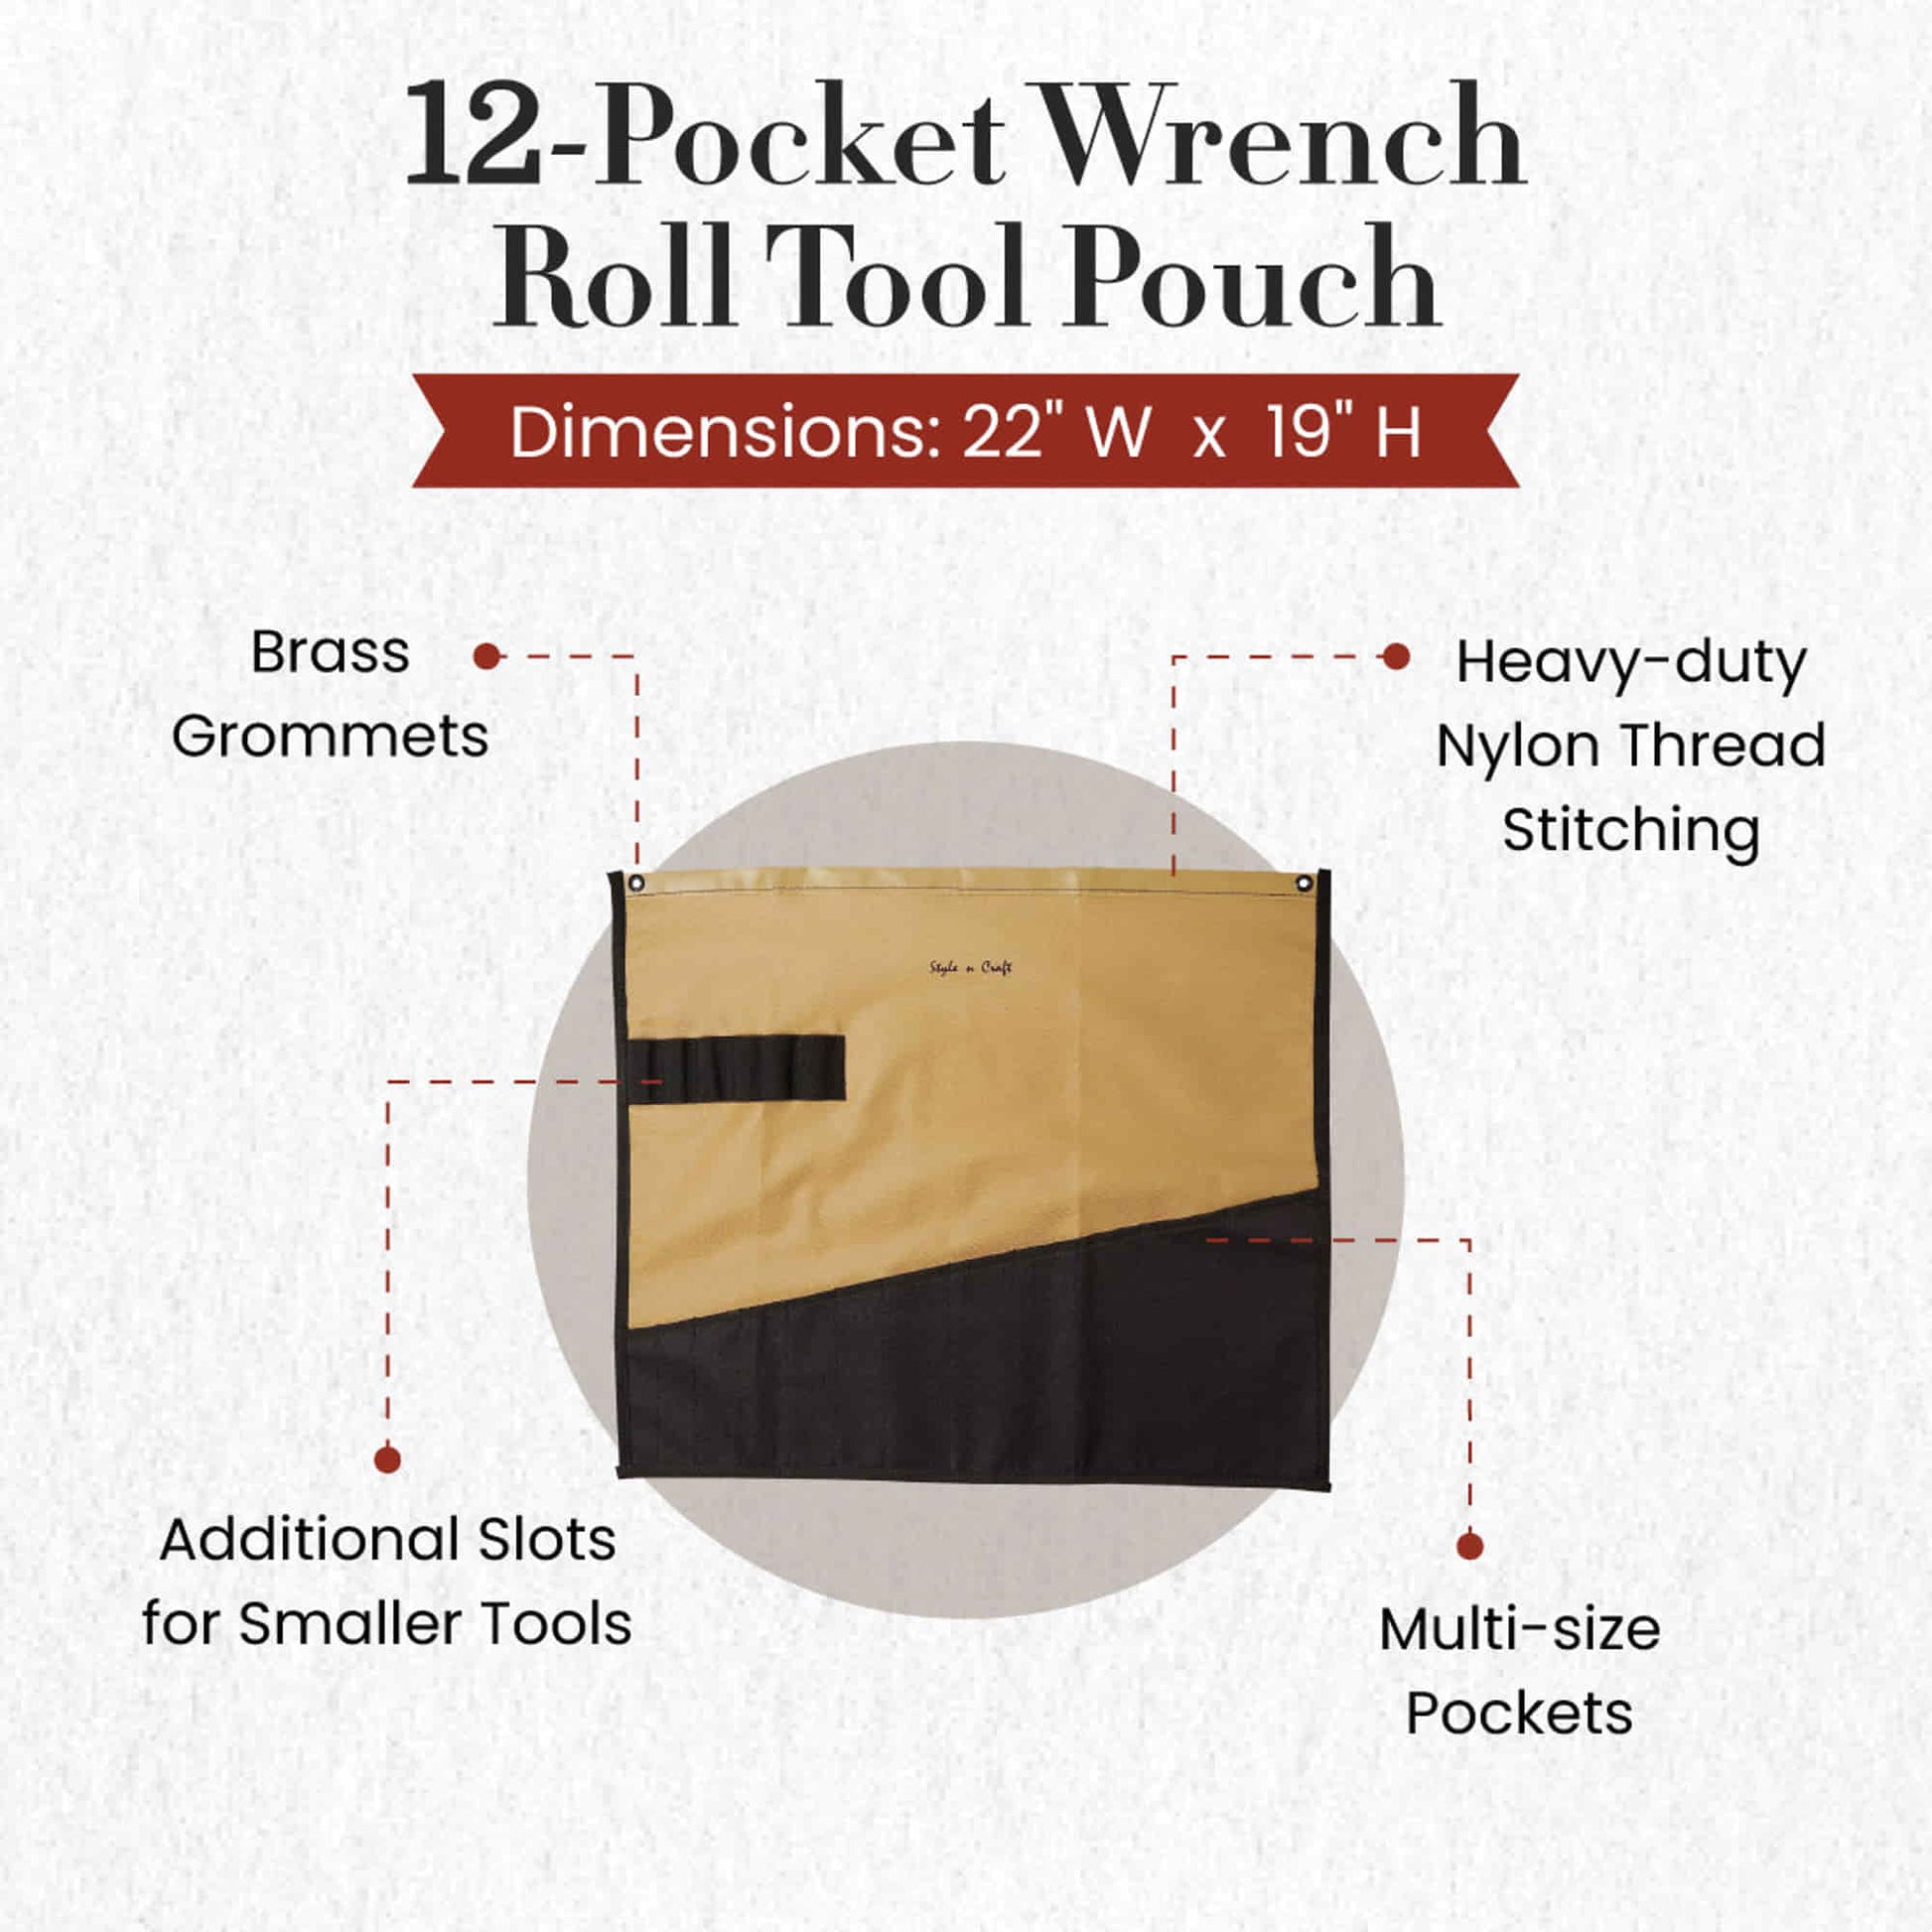 Style n Craft 76509 - 12 Pocket Wrench Roll Tool Pouch in Heavy Duty 600DPolyester in Khaki & Black Color Combination - Open View Showing the Details